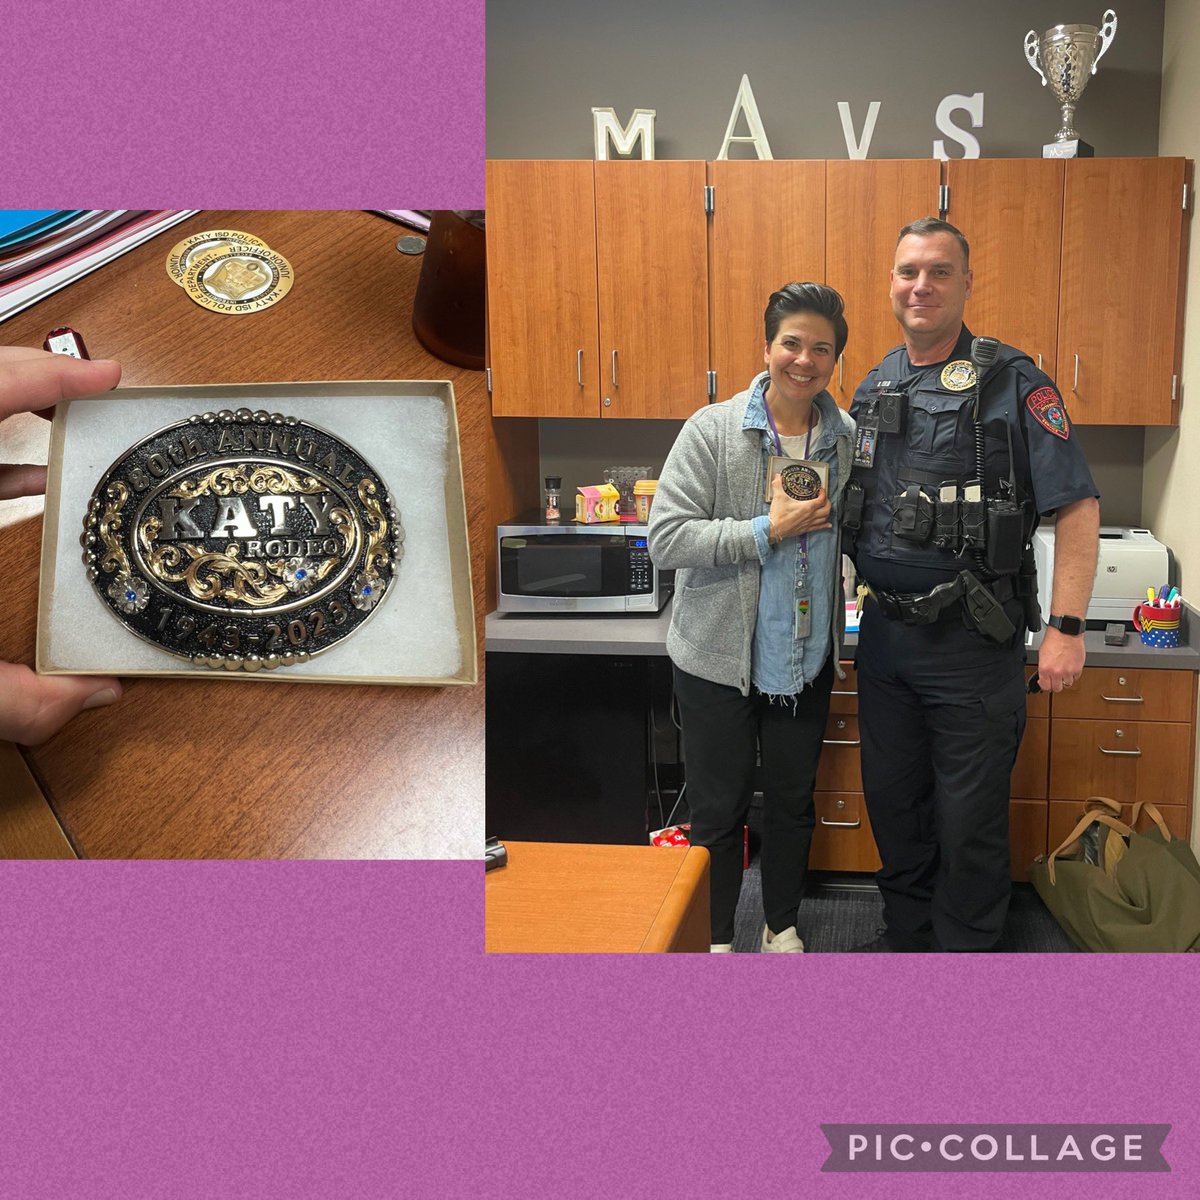 My job is significantly>than your job.

Officer Feild surprised me today with my very own belt buckle! I can’t wait to show this beauty off! #ilovemortonranch #yeehaw